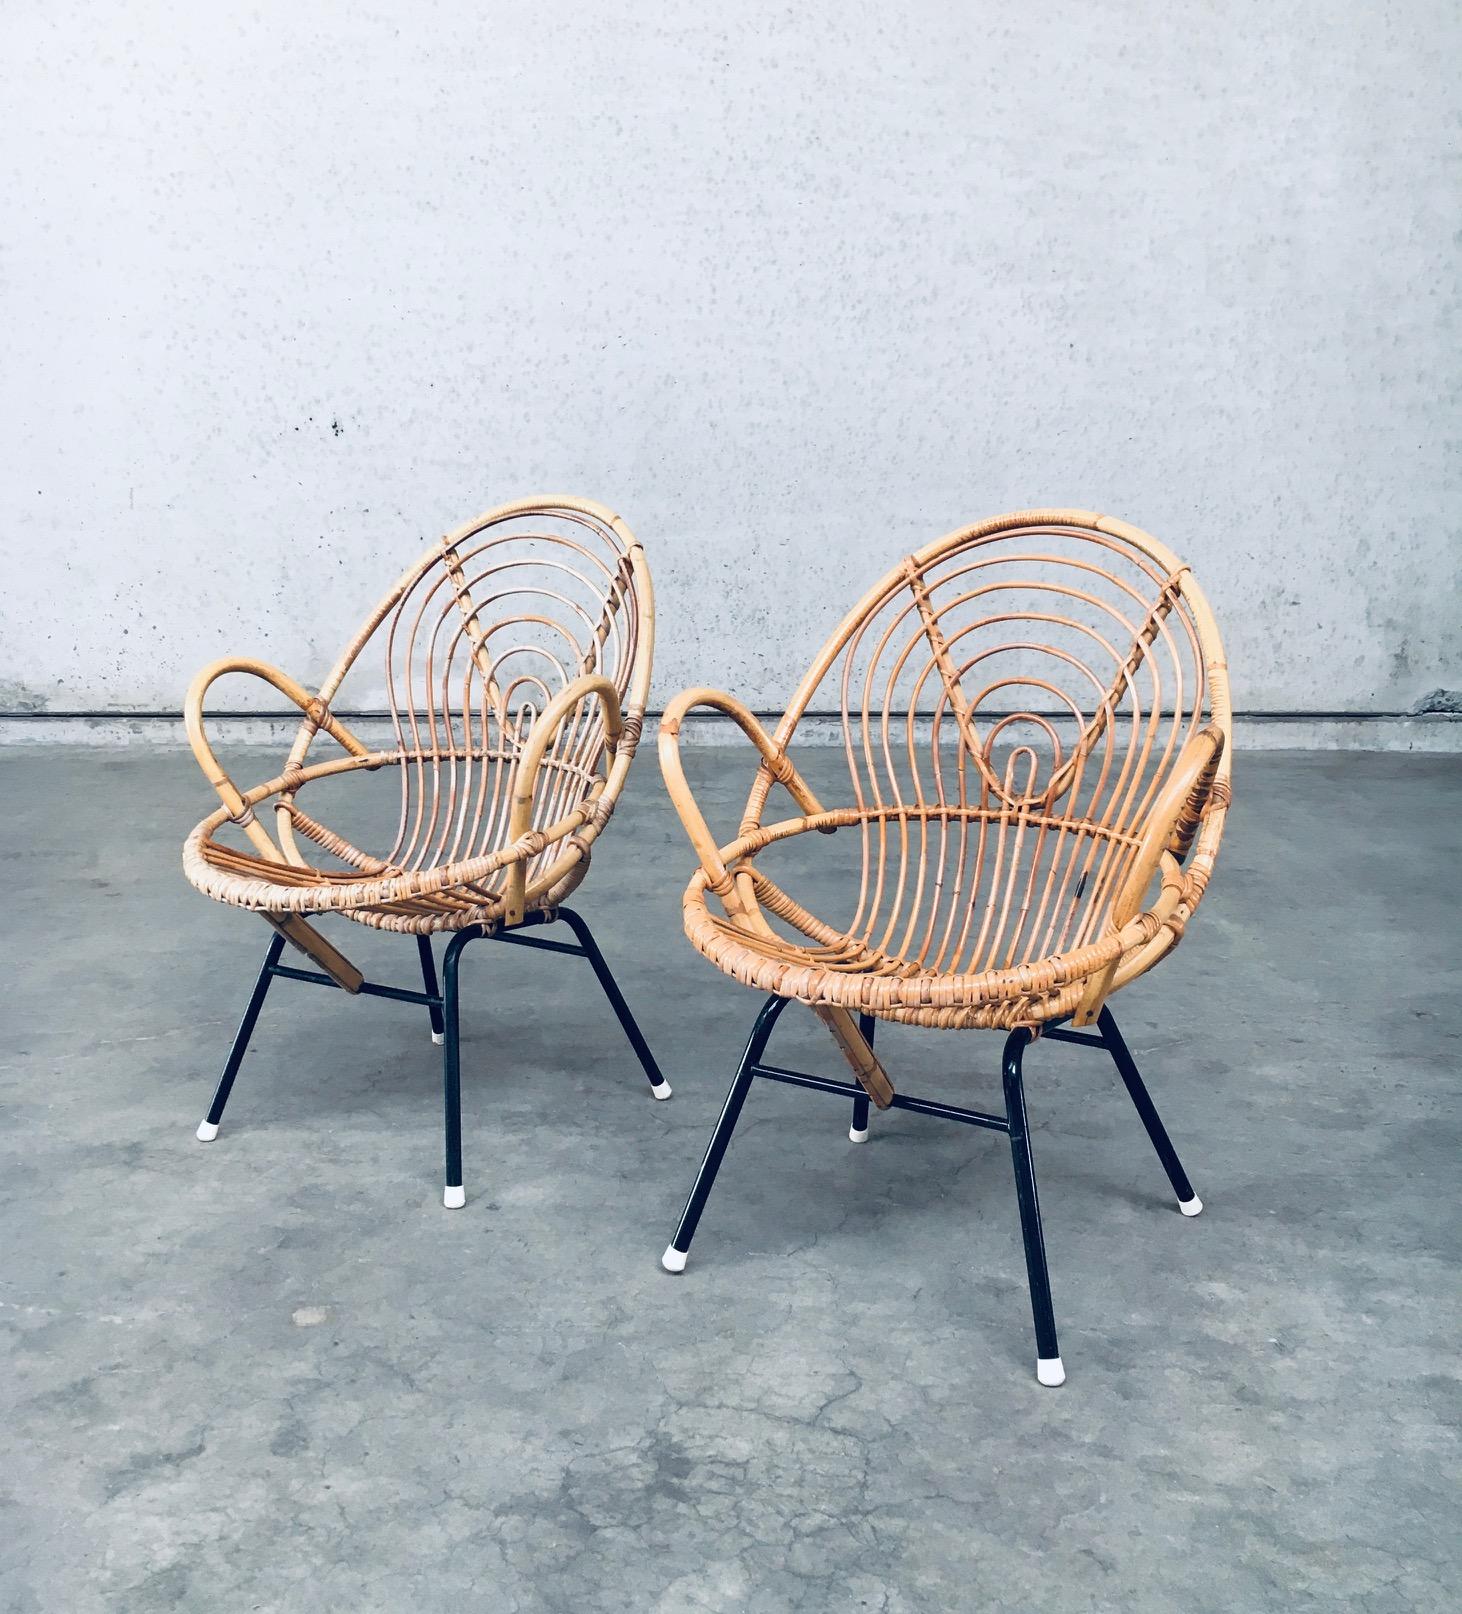 Vintage Midcentury Dutch Design Pair of Rattan / Bamboo Lounge Chairs by Rohe Noordwolde. Made in the Netherlands, Holland, 1950's / 60's period. Bamboo / Rattan construction with black metal base. These armchairs have a nice round pattern in the